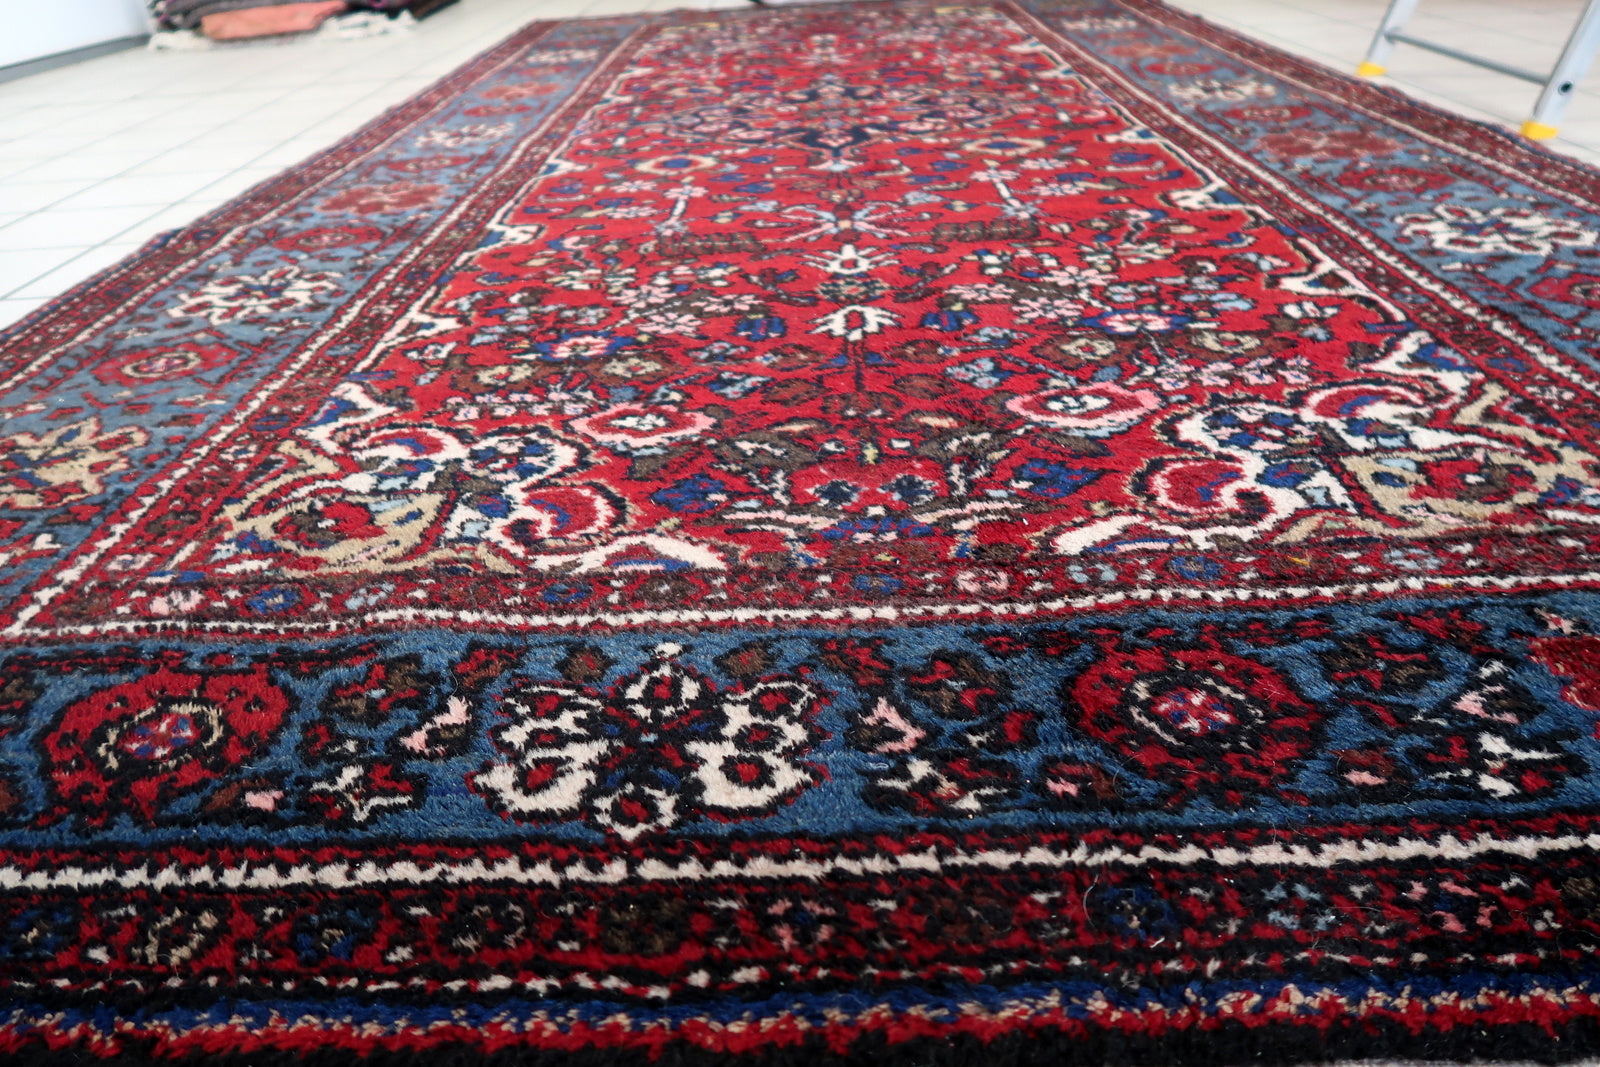 Close-up of vintage charm on Handmade Vintage Persian Malayer Rug - Detailed view showcasing the rug's vintage appeal.